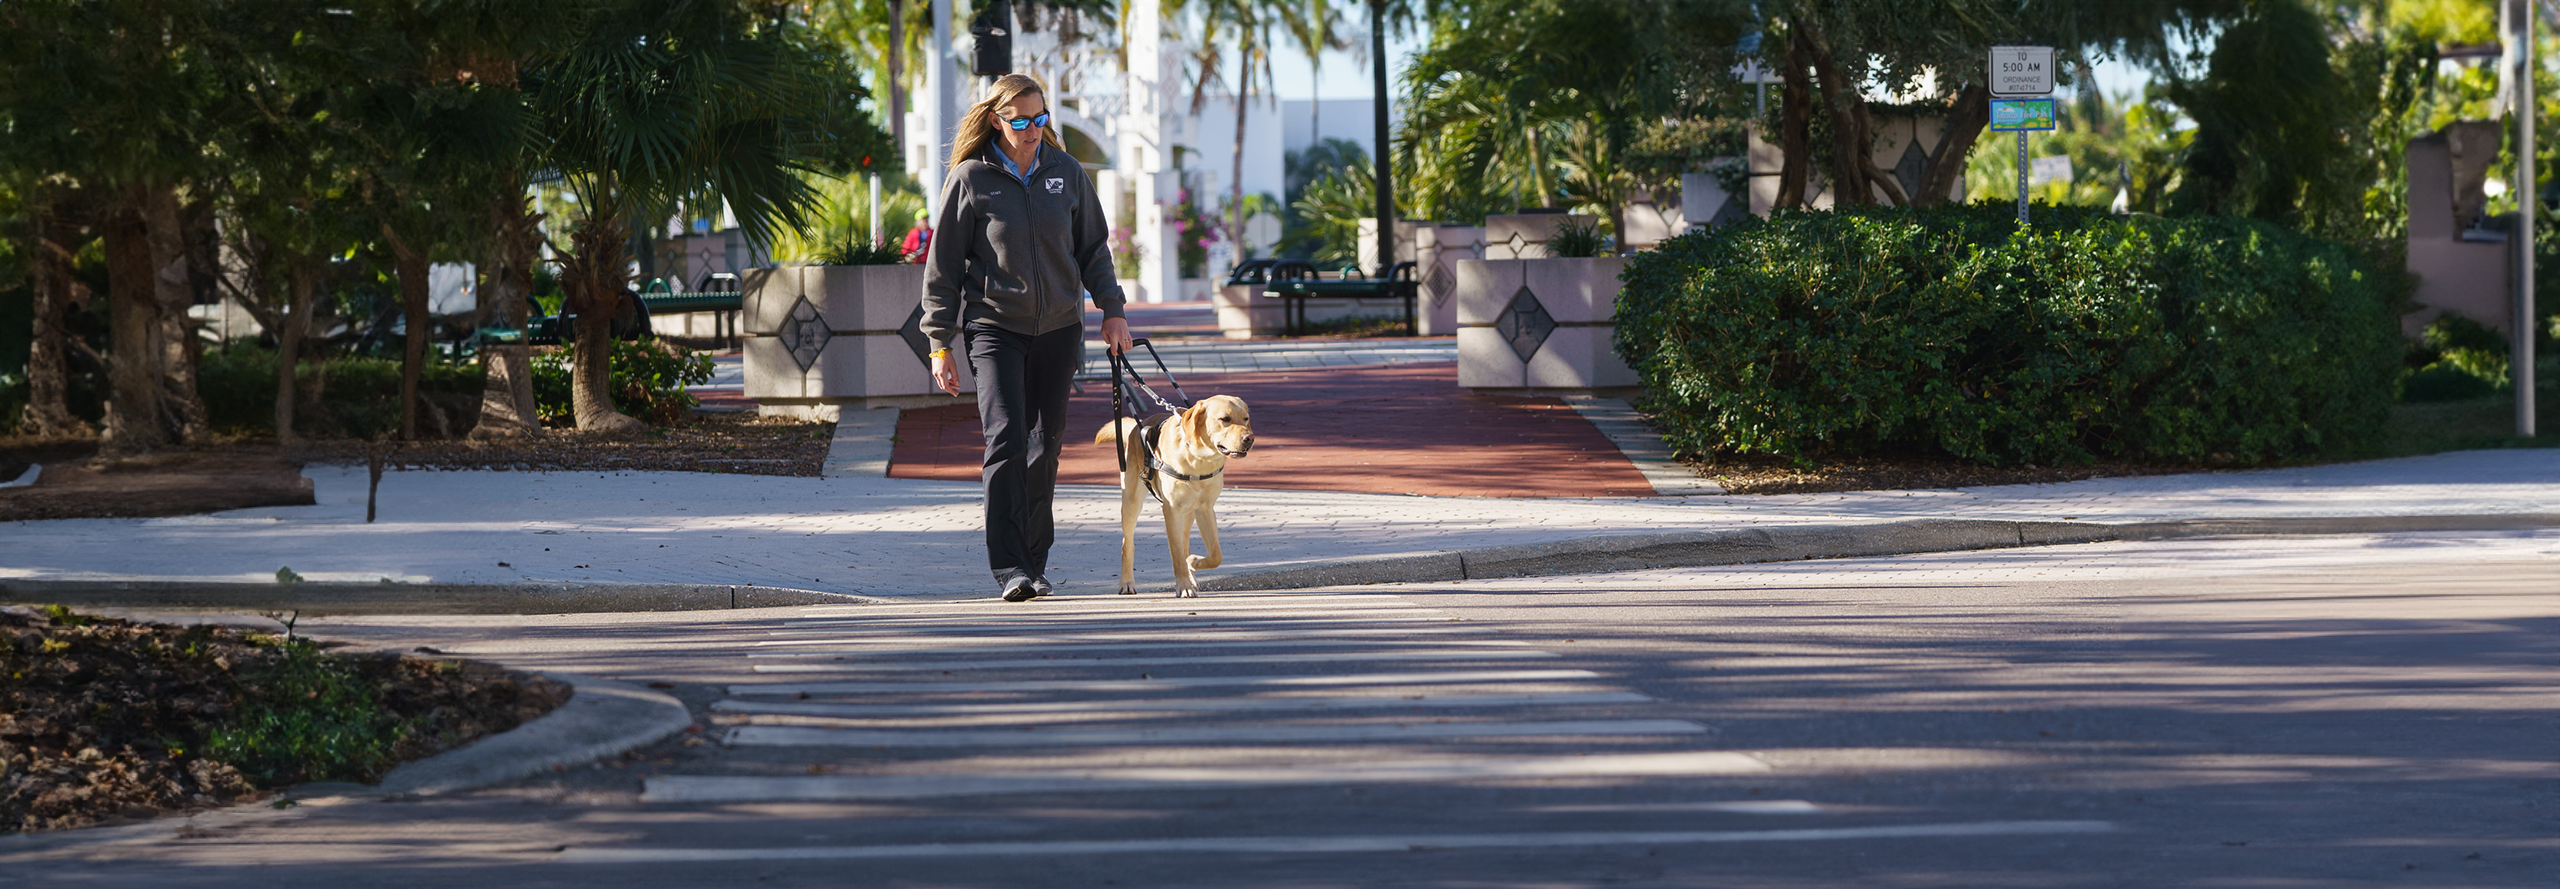 A guide dog trainer crosses a road with a yellow lab guide dog in a guide dog harness